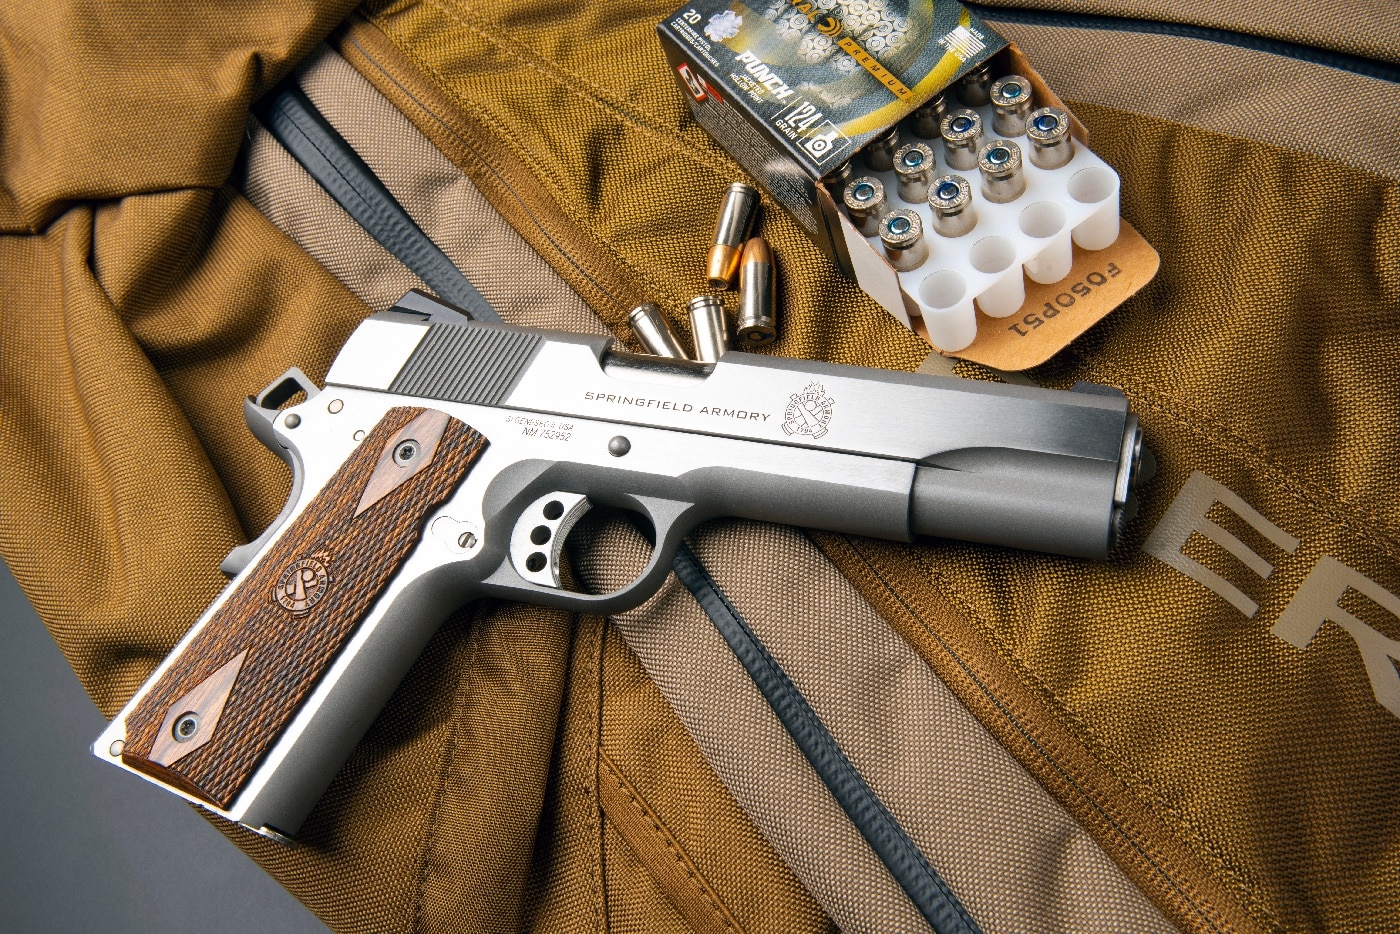 This photo shows a Springfield Armory 9mm 1911 handgun with Federal Ammunition 124-grain hollow point bullets. The load has proved to be accurate and effective in defensive shootings.